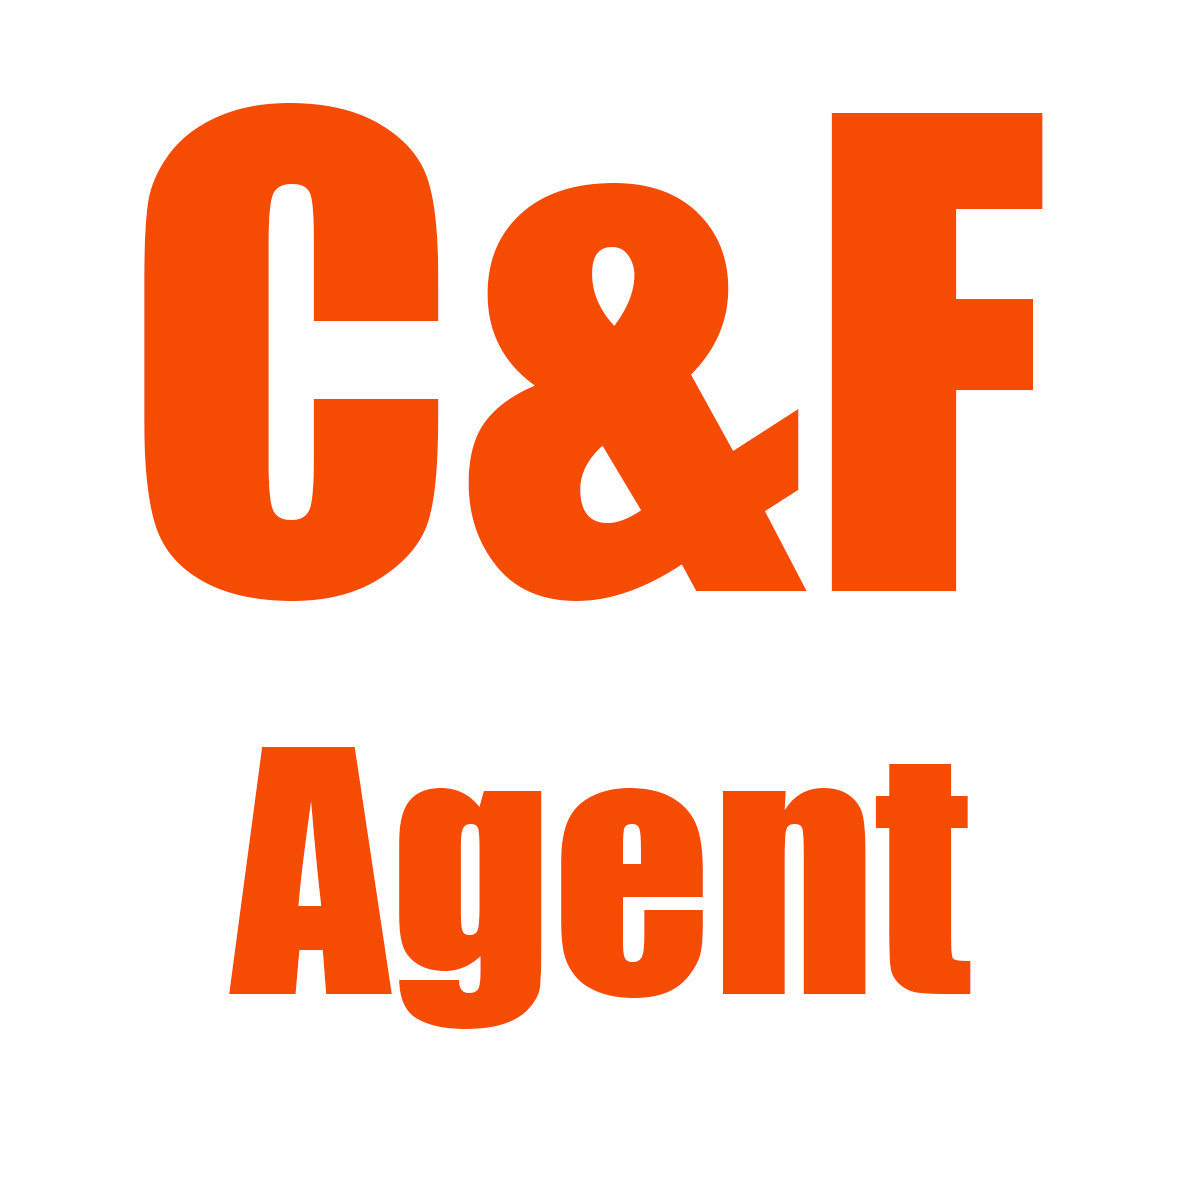 Clearing & Forwarding Agents (C & F agent - CNF Agent) in Bangladesh